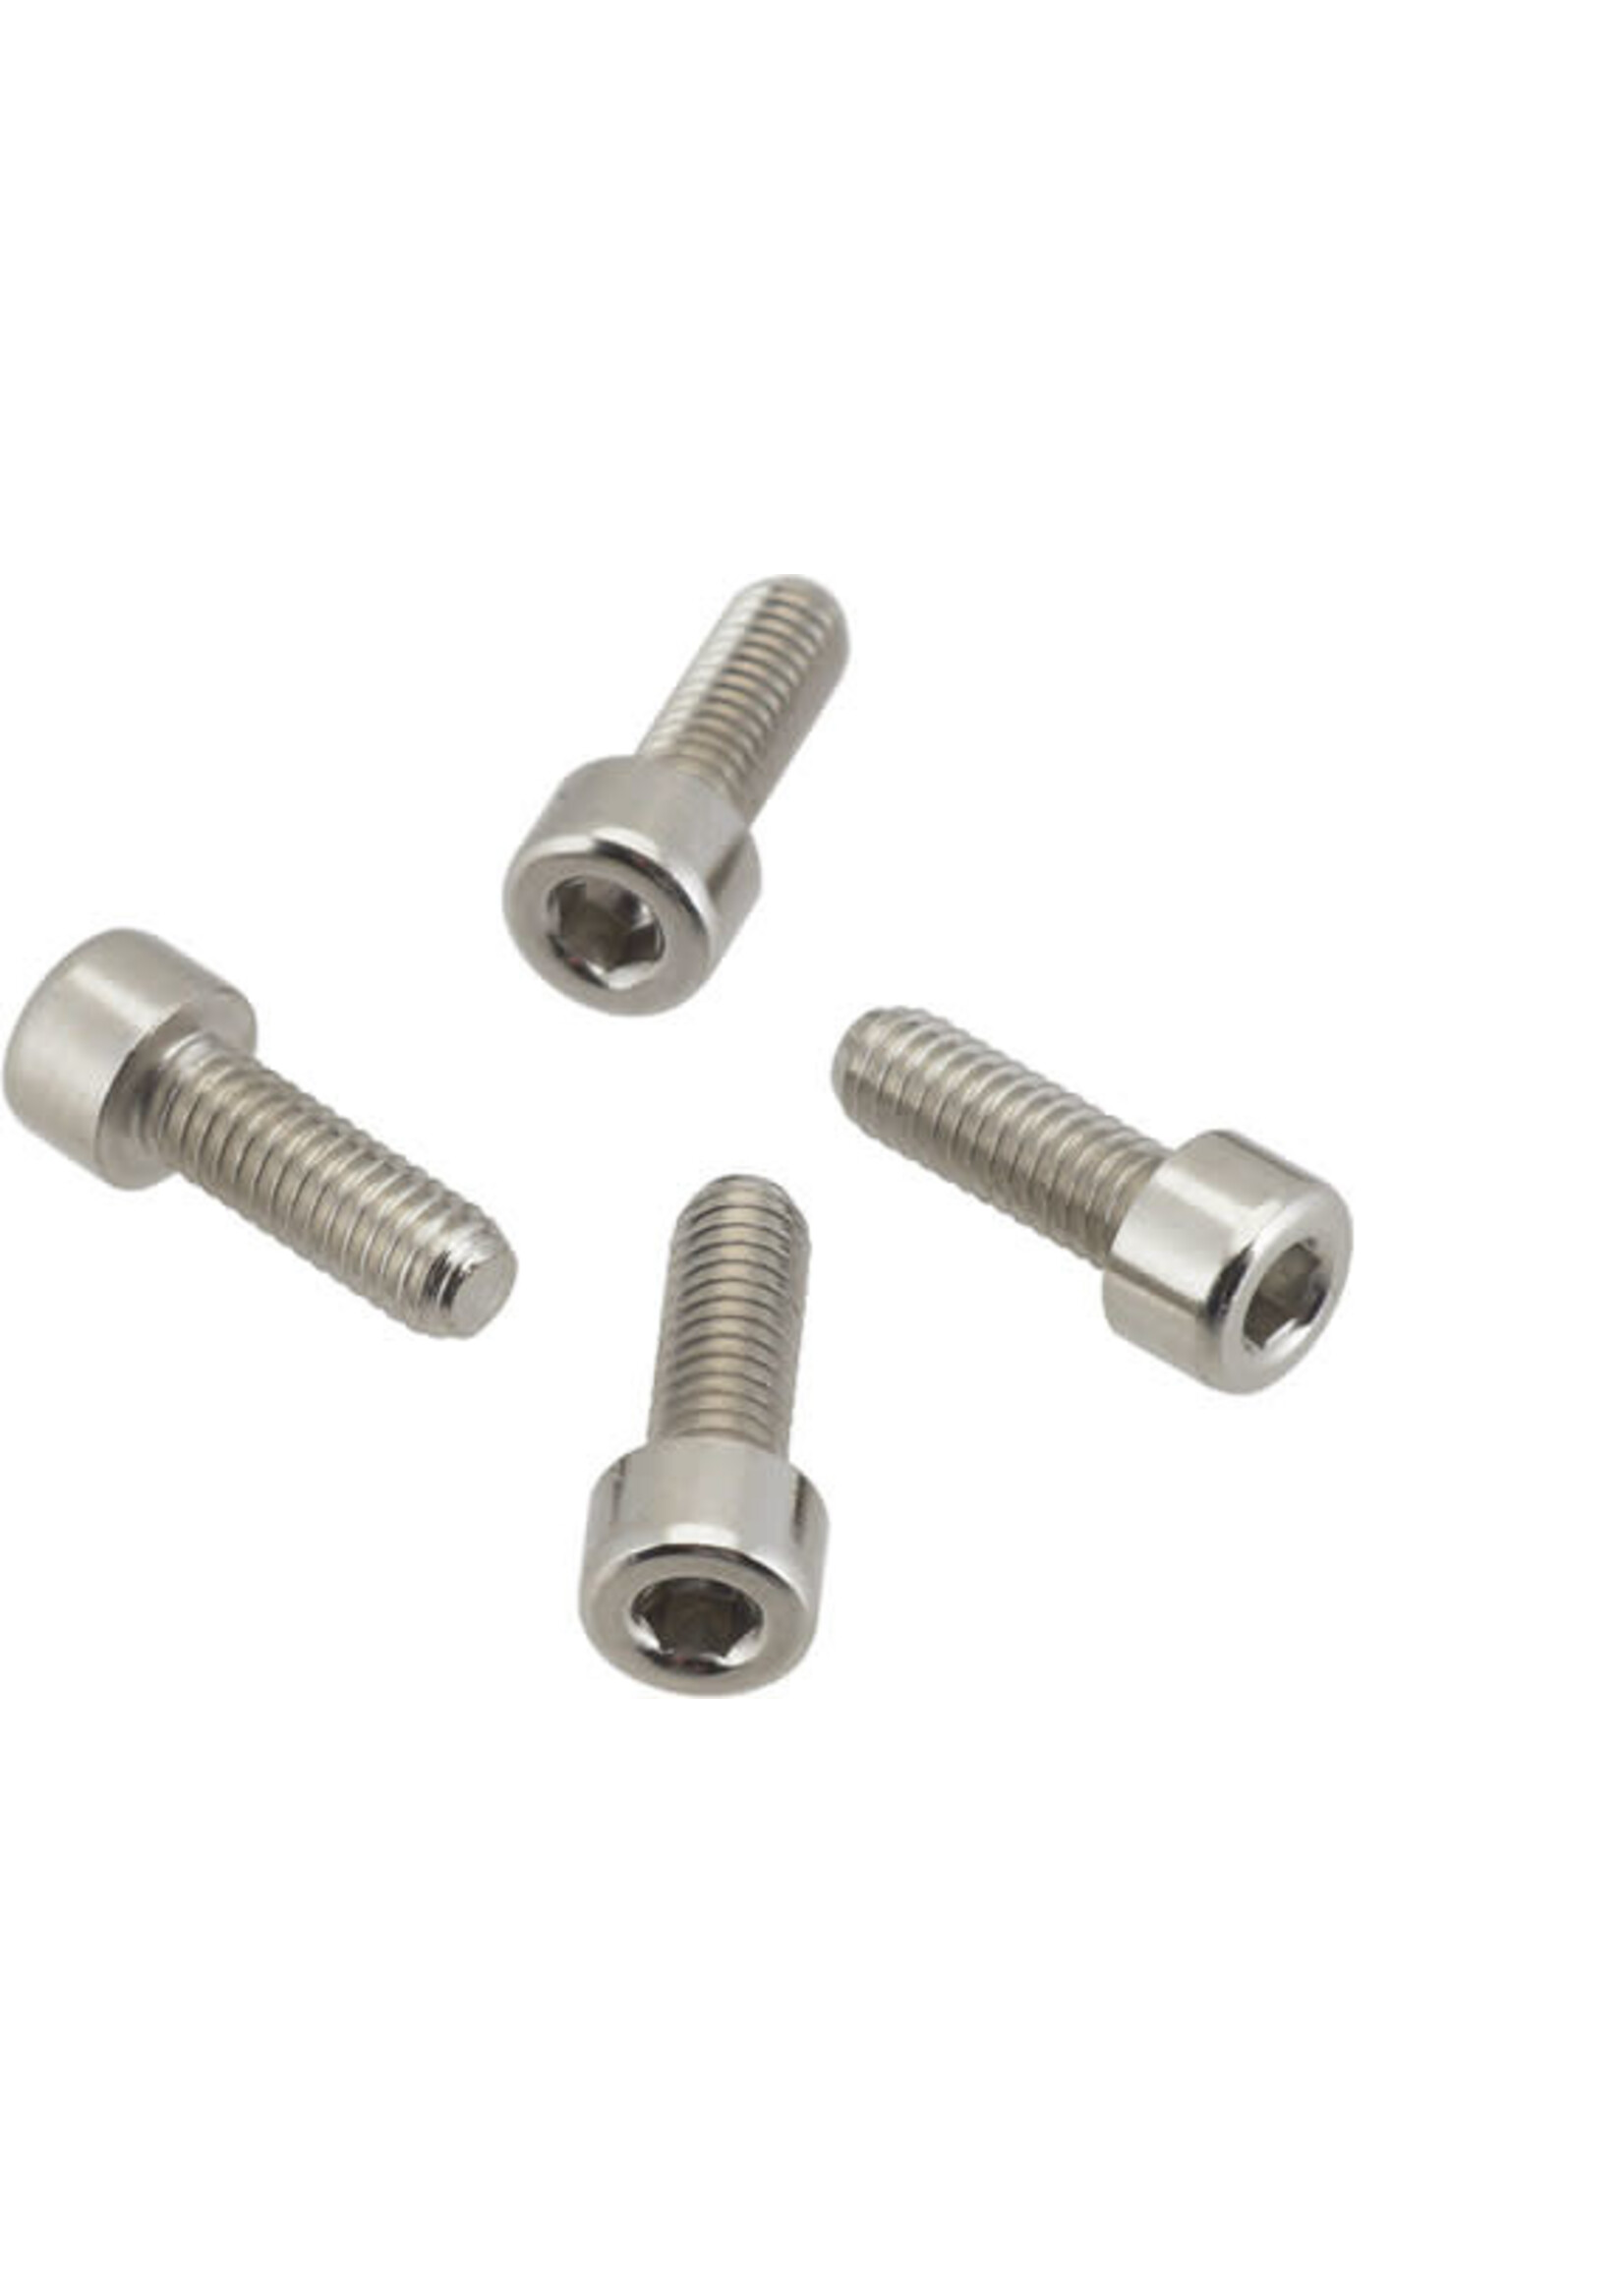 ODI LOCK JAW CLAMP REPLACEMENT BOLTS